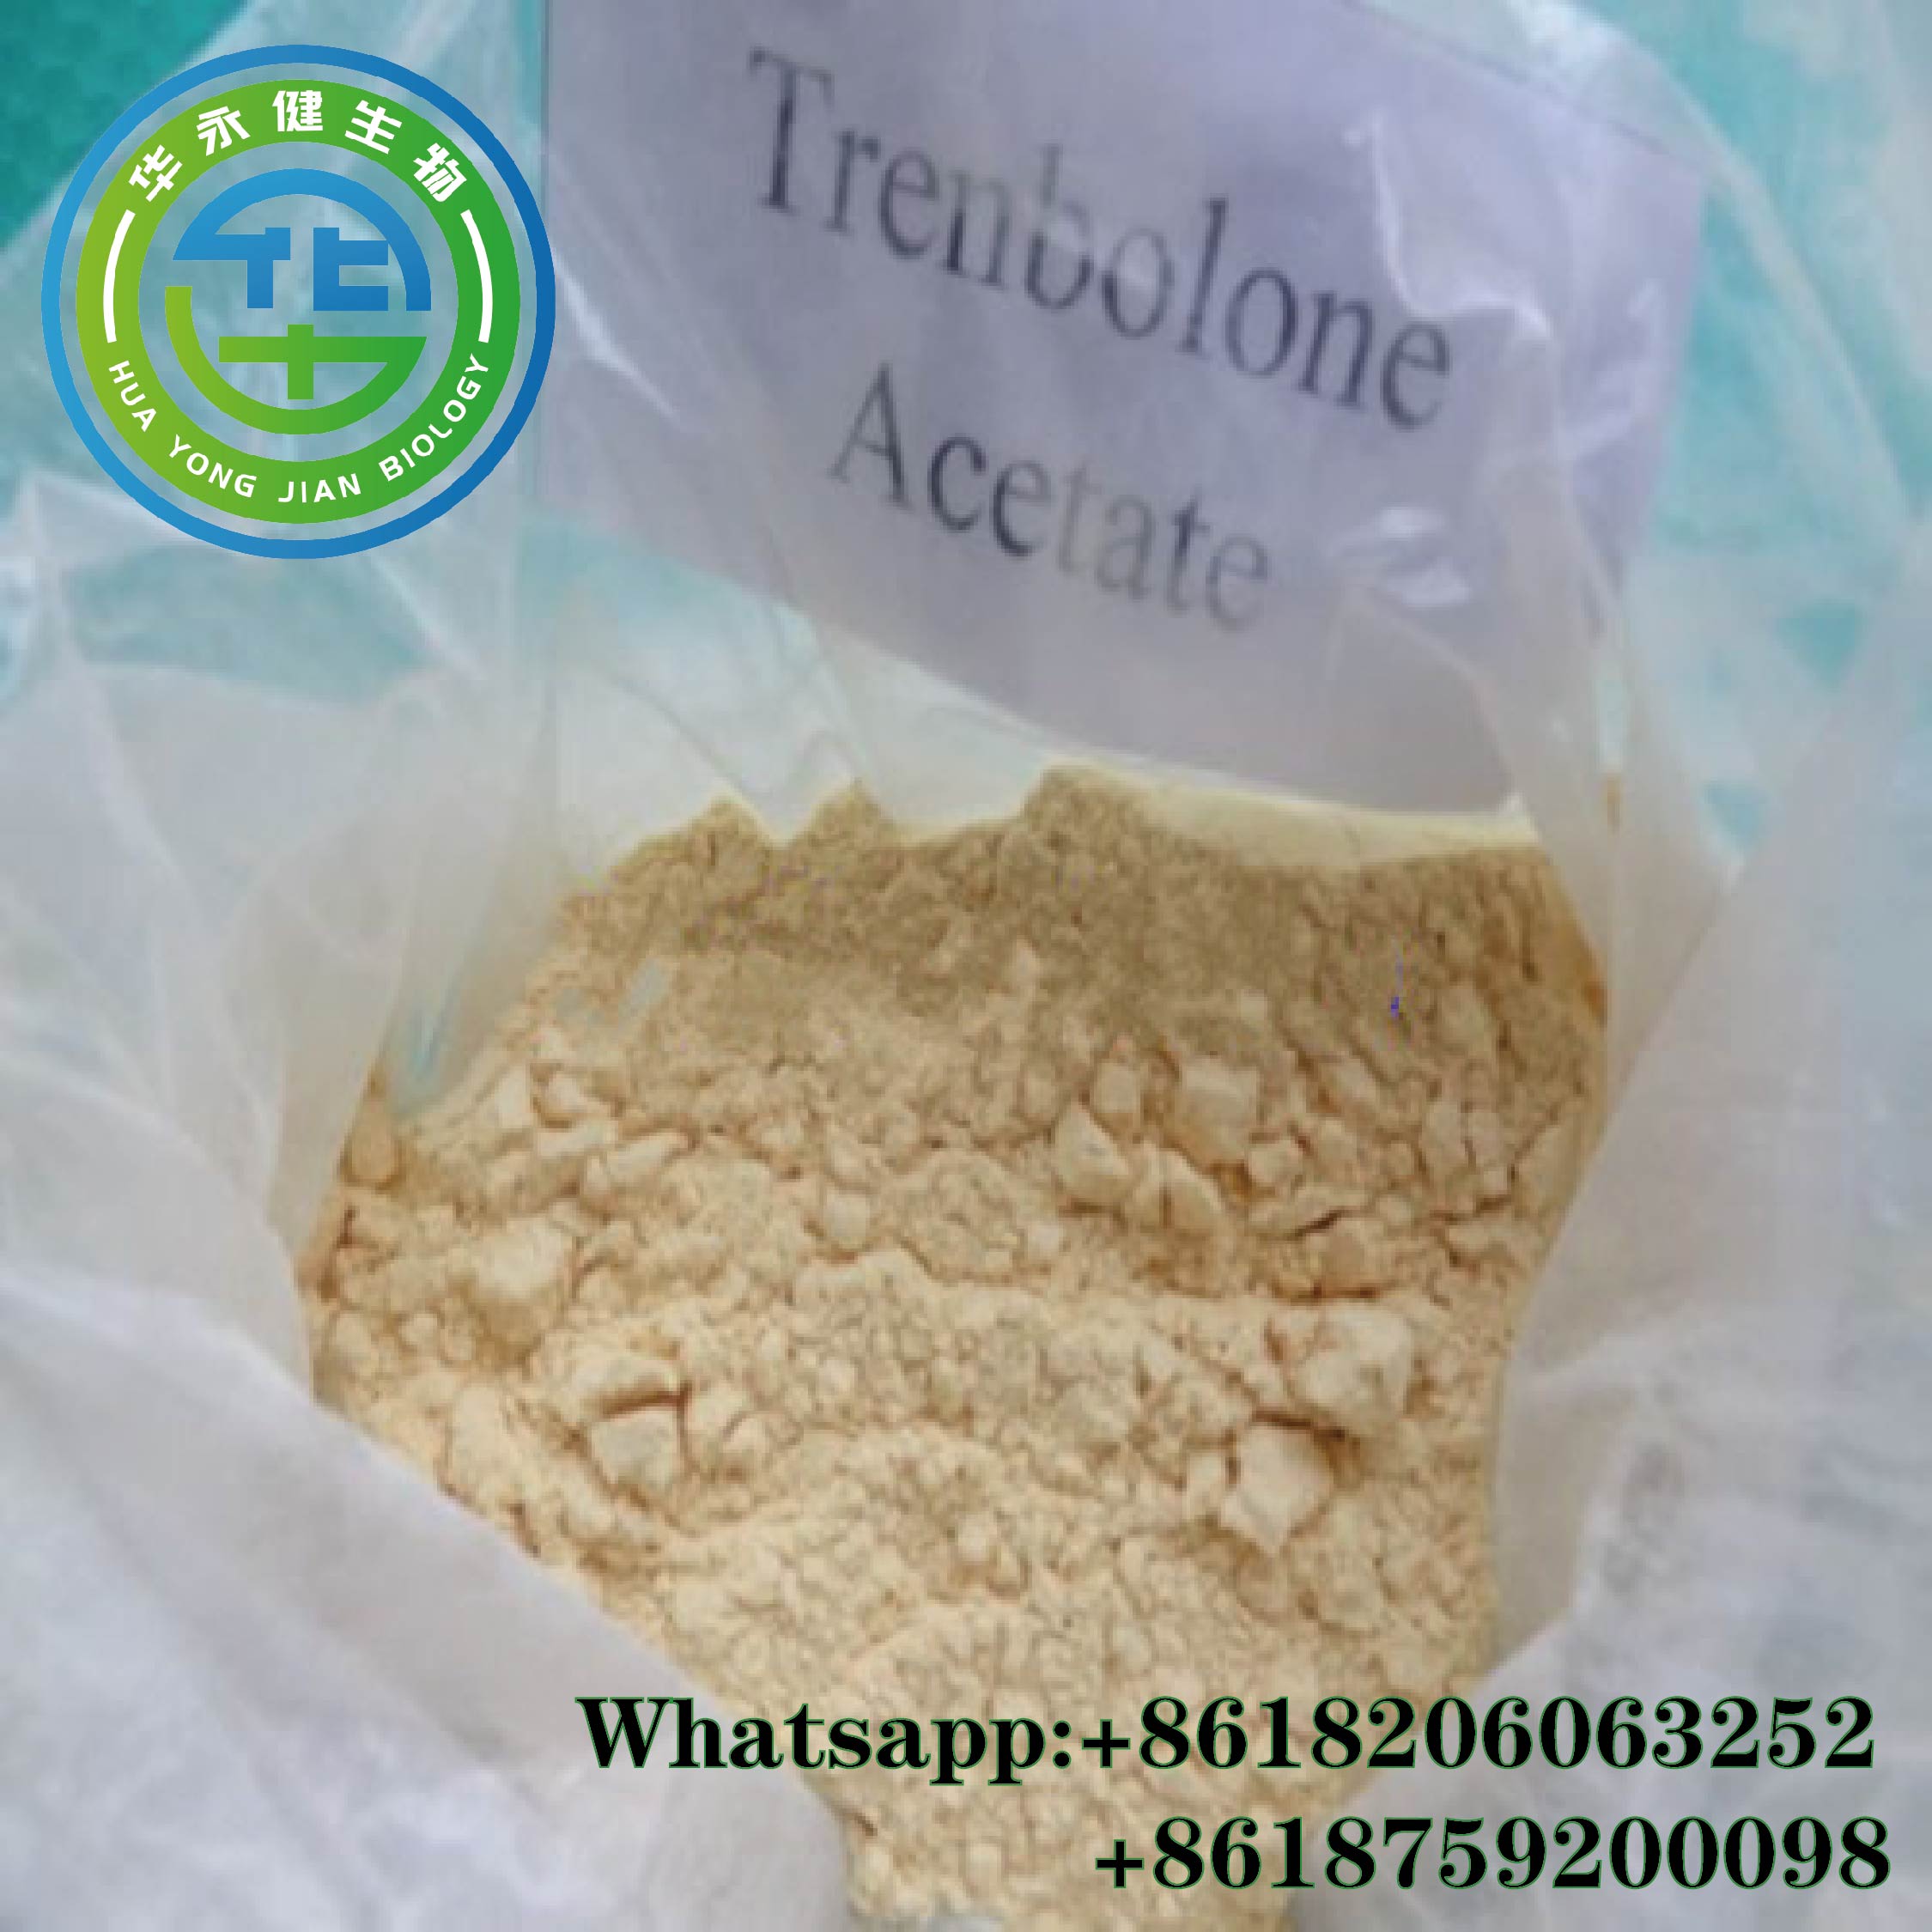 Yellow Anabolic Powder Tren Anabolic Steroid Trenbolone Acetate Cycle For Bodybuilding Tren A CasNO.10161-34-9  